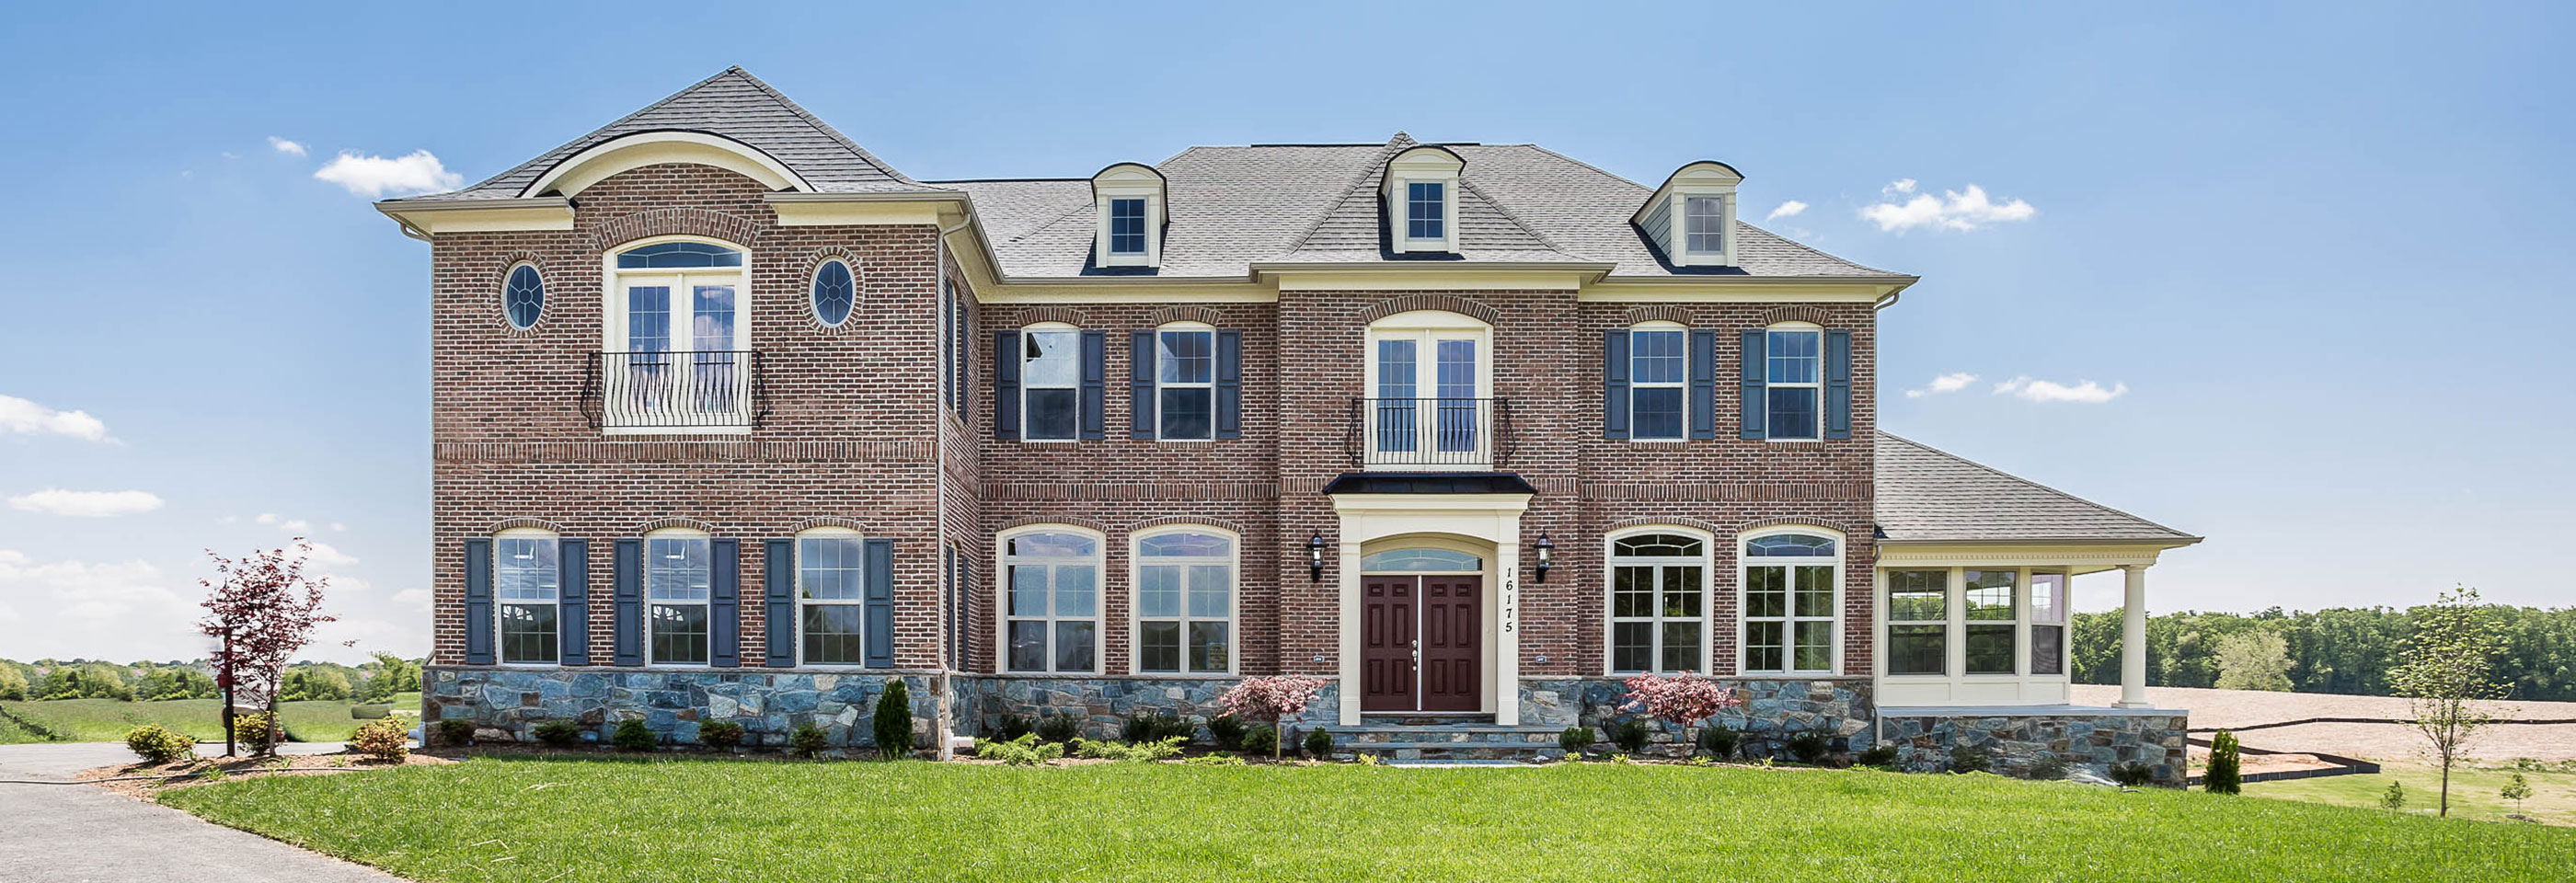 Exteriors, Custom Single Family Homes in Montgomery County MD